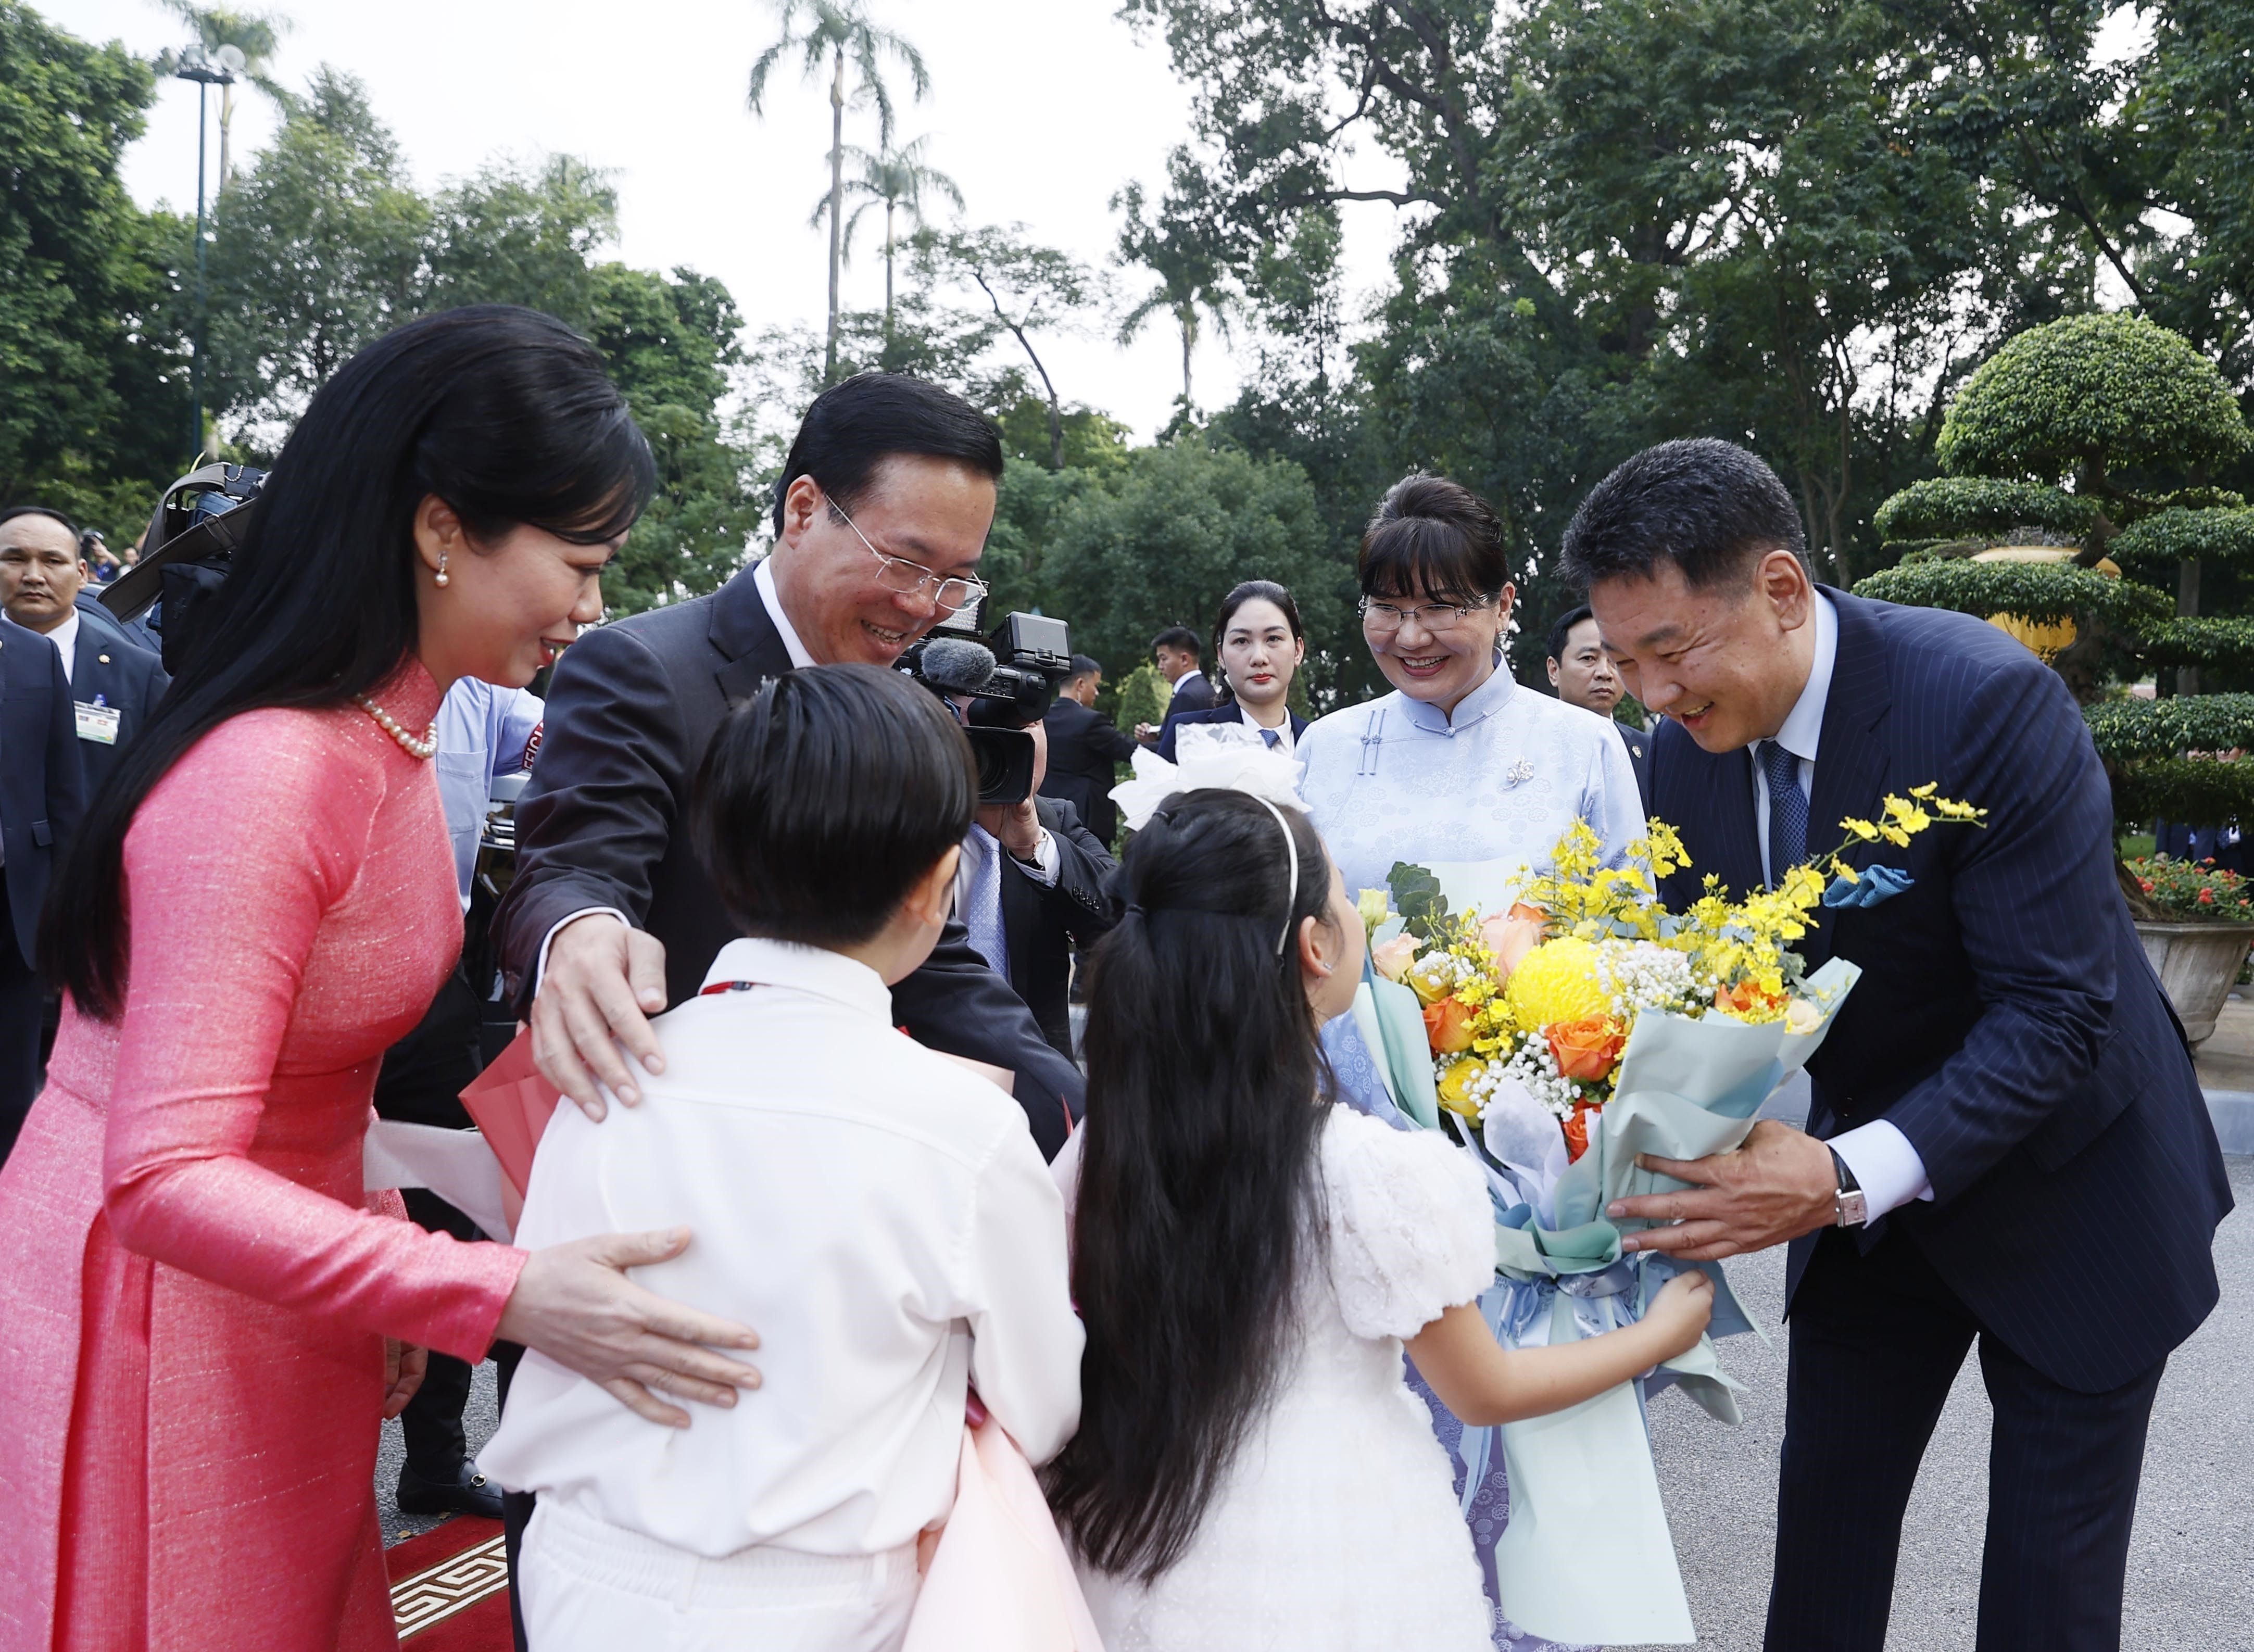 Image: Two Hanoian children gave flowers to welcome Mongolian President and his wife.